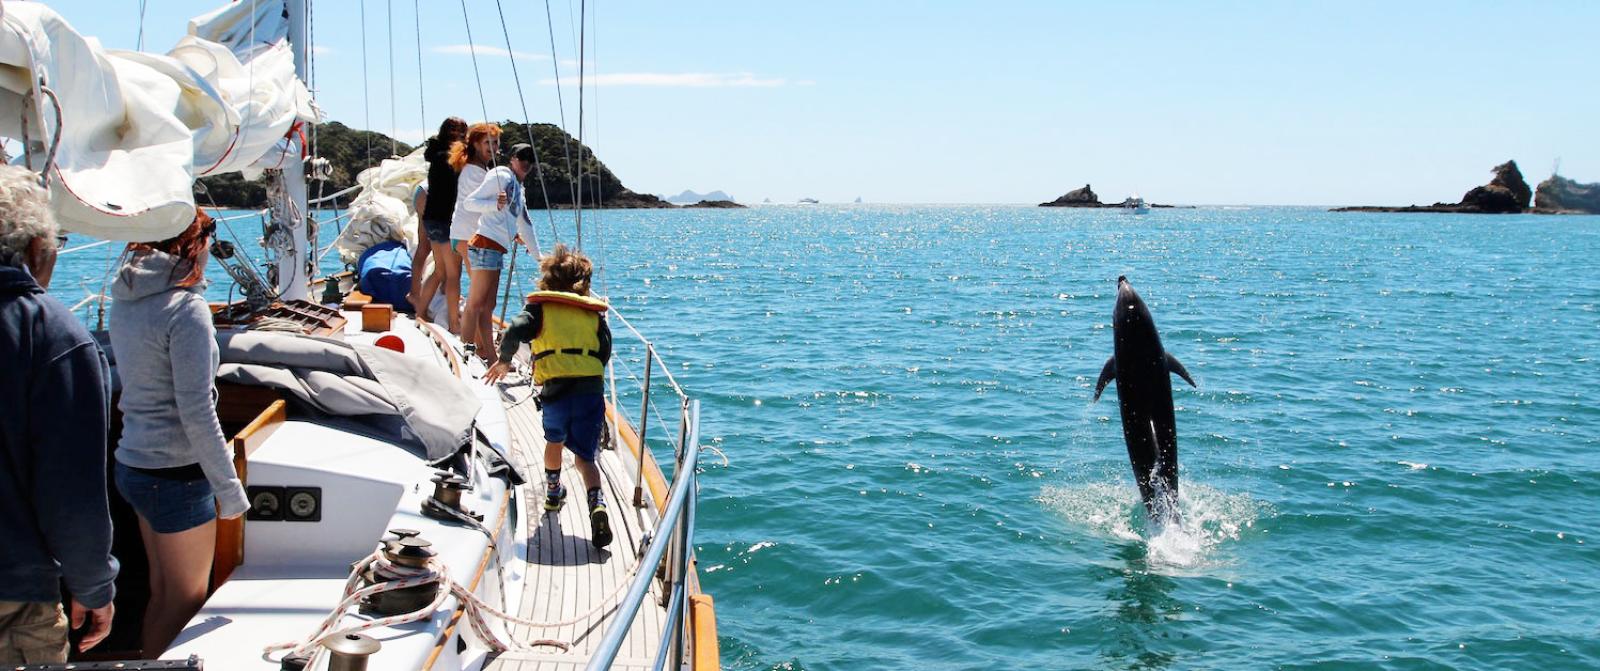 A group watching a dolphin while sailing in the Bay of Islands.